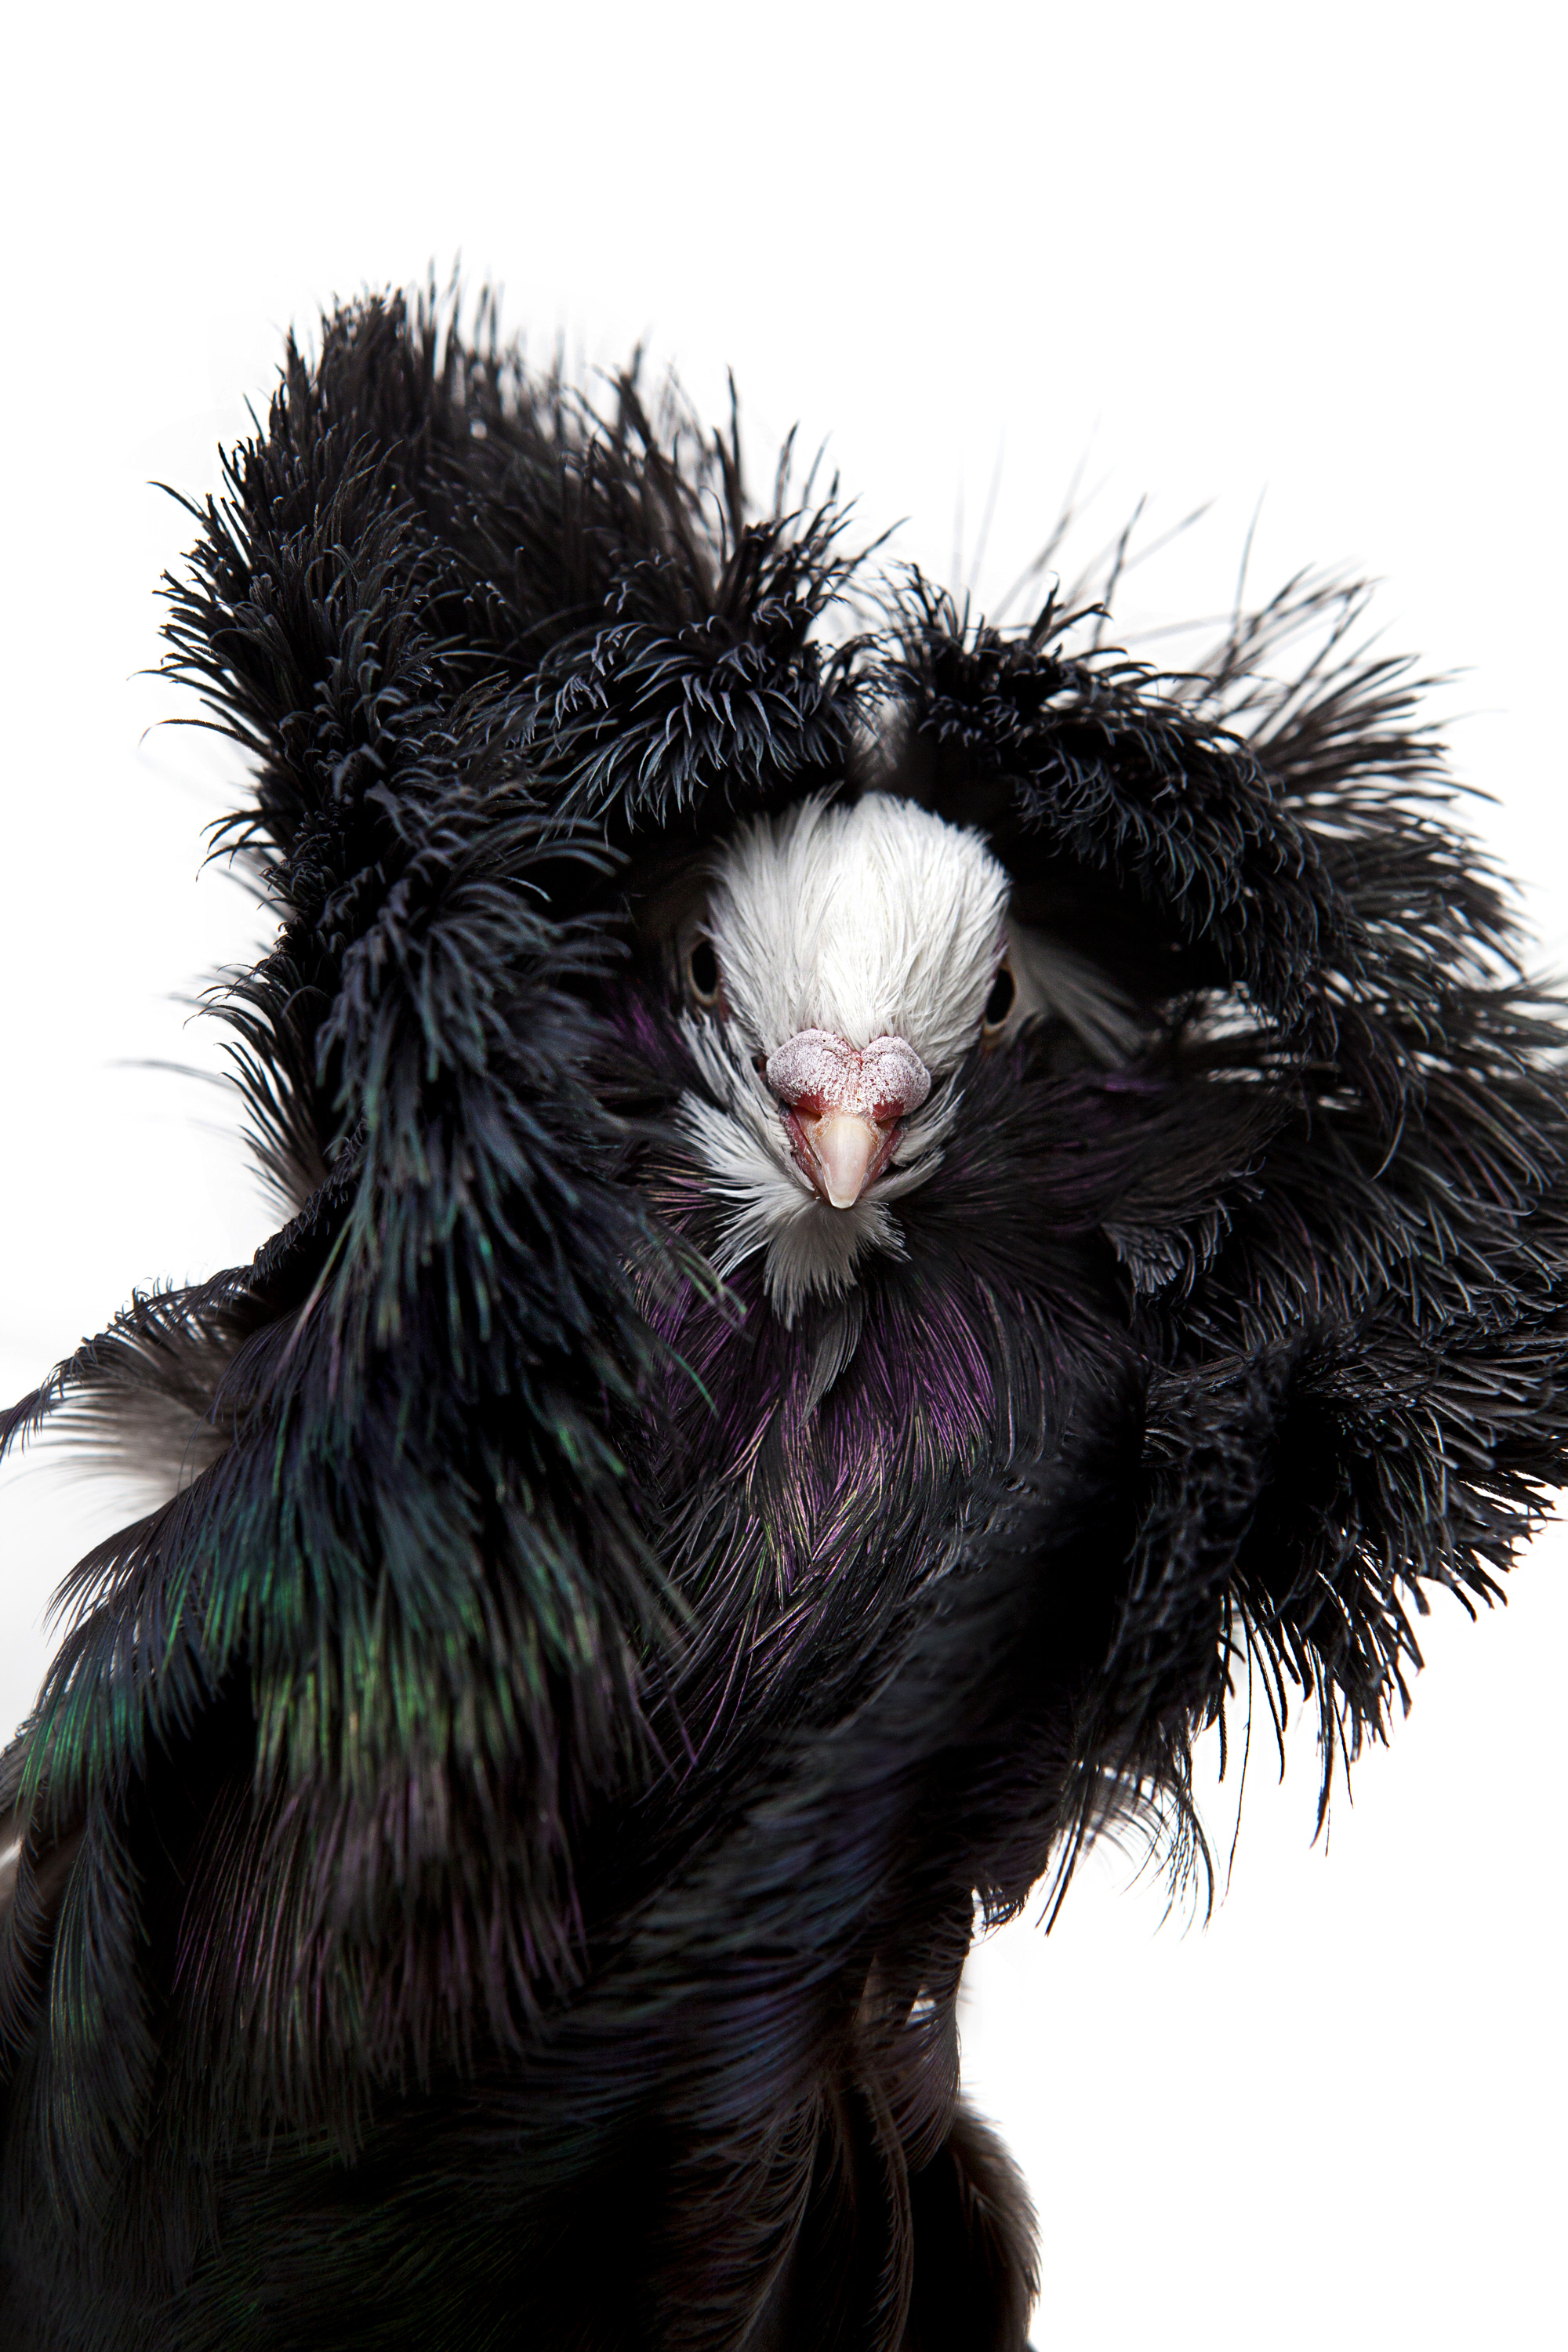 The Jacobin Pigeon, named after the Jacobin order of monks, is known for its feathered hood over its head. It has been bred with a hood so large that it can interfere with mating and they often require foster parents to raise their young.